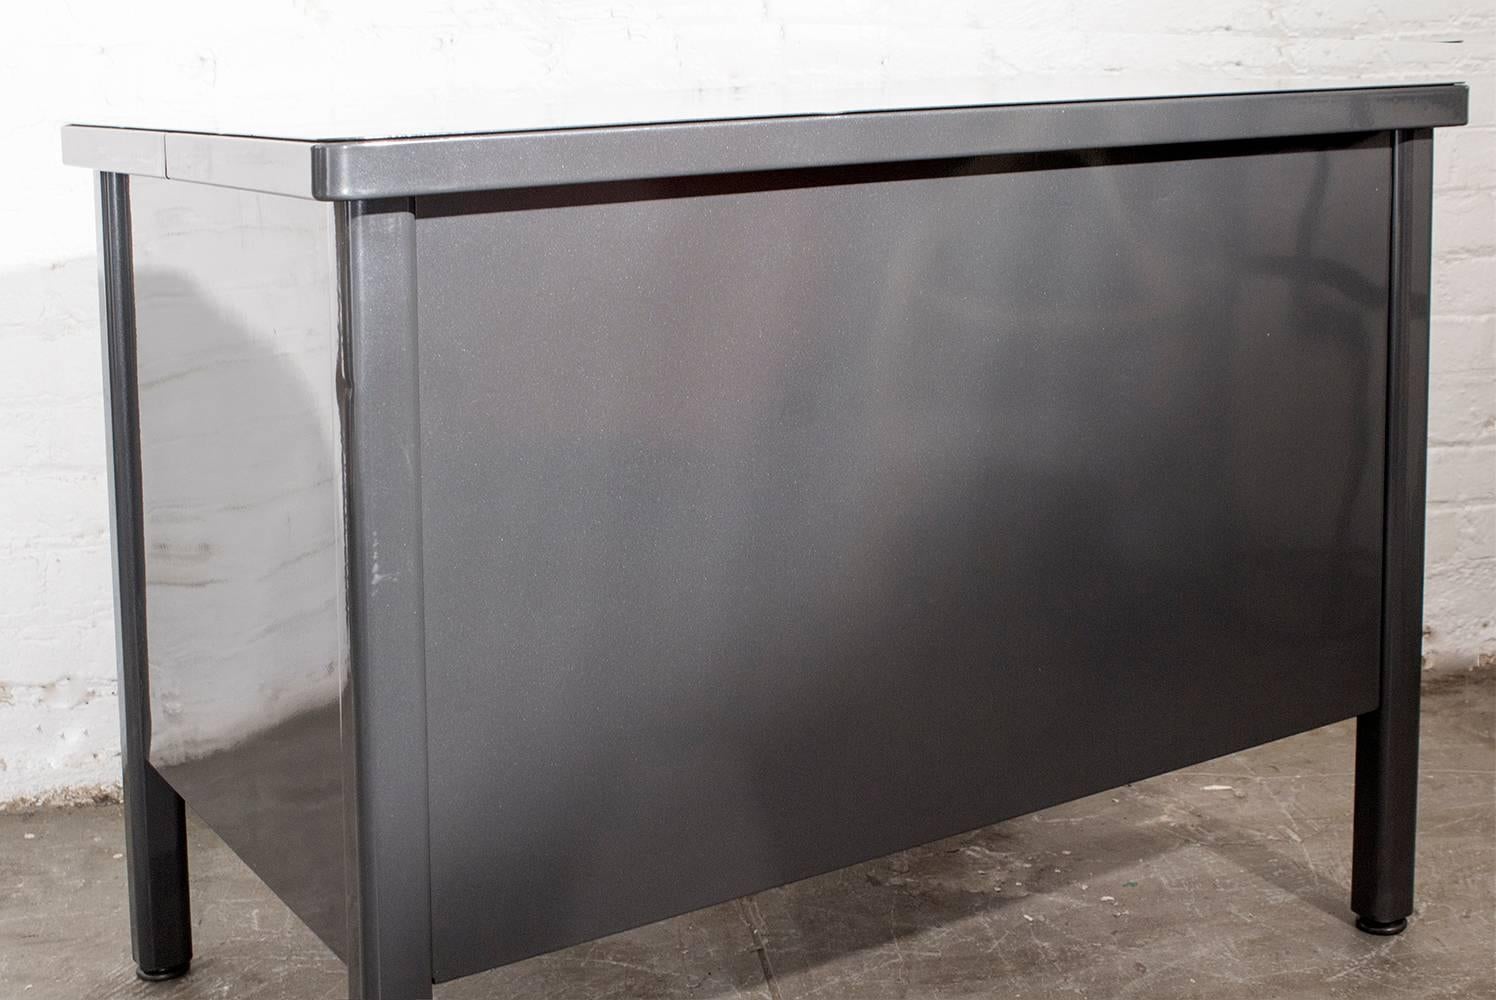 Powder-Coated 1940s Industrial Writing Desk by General Fireproofing Co., Refinished